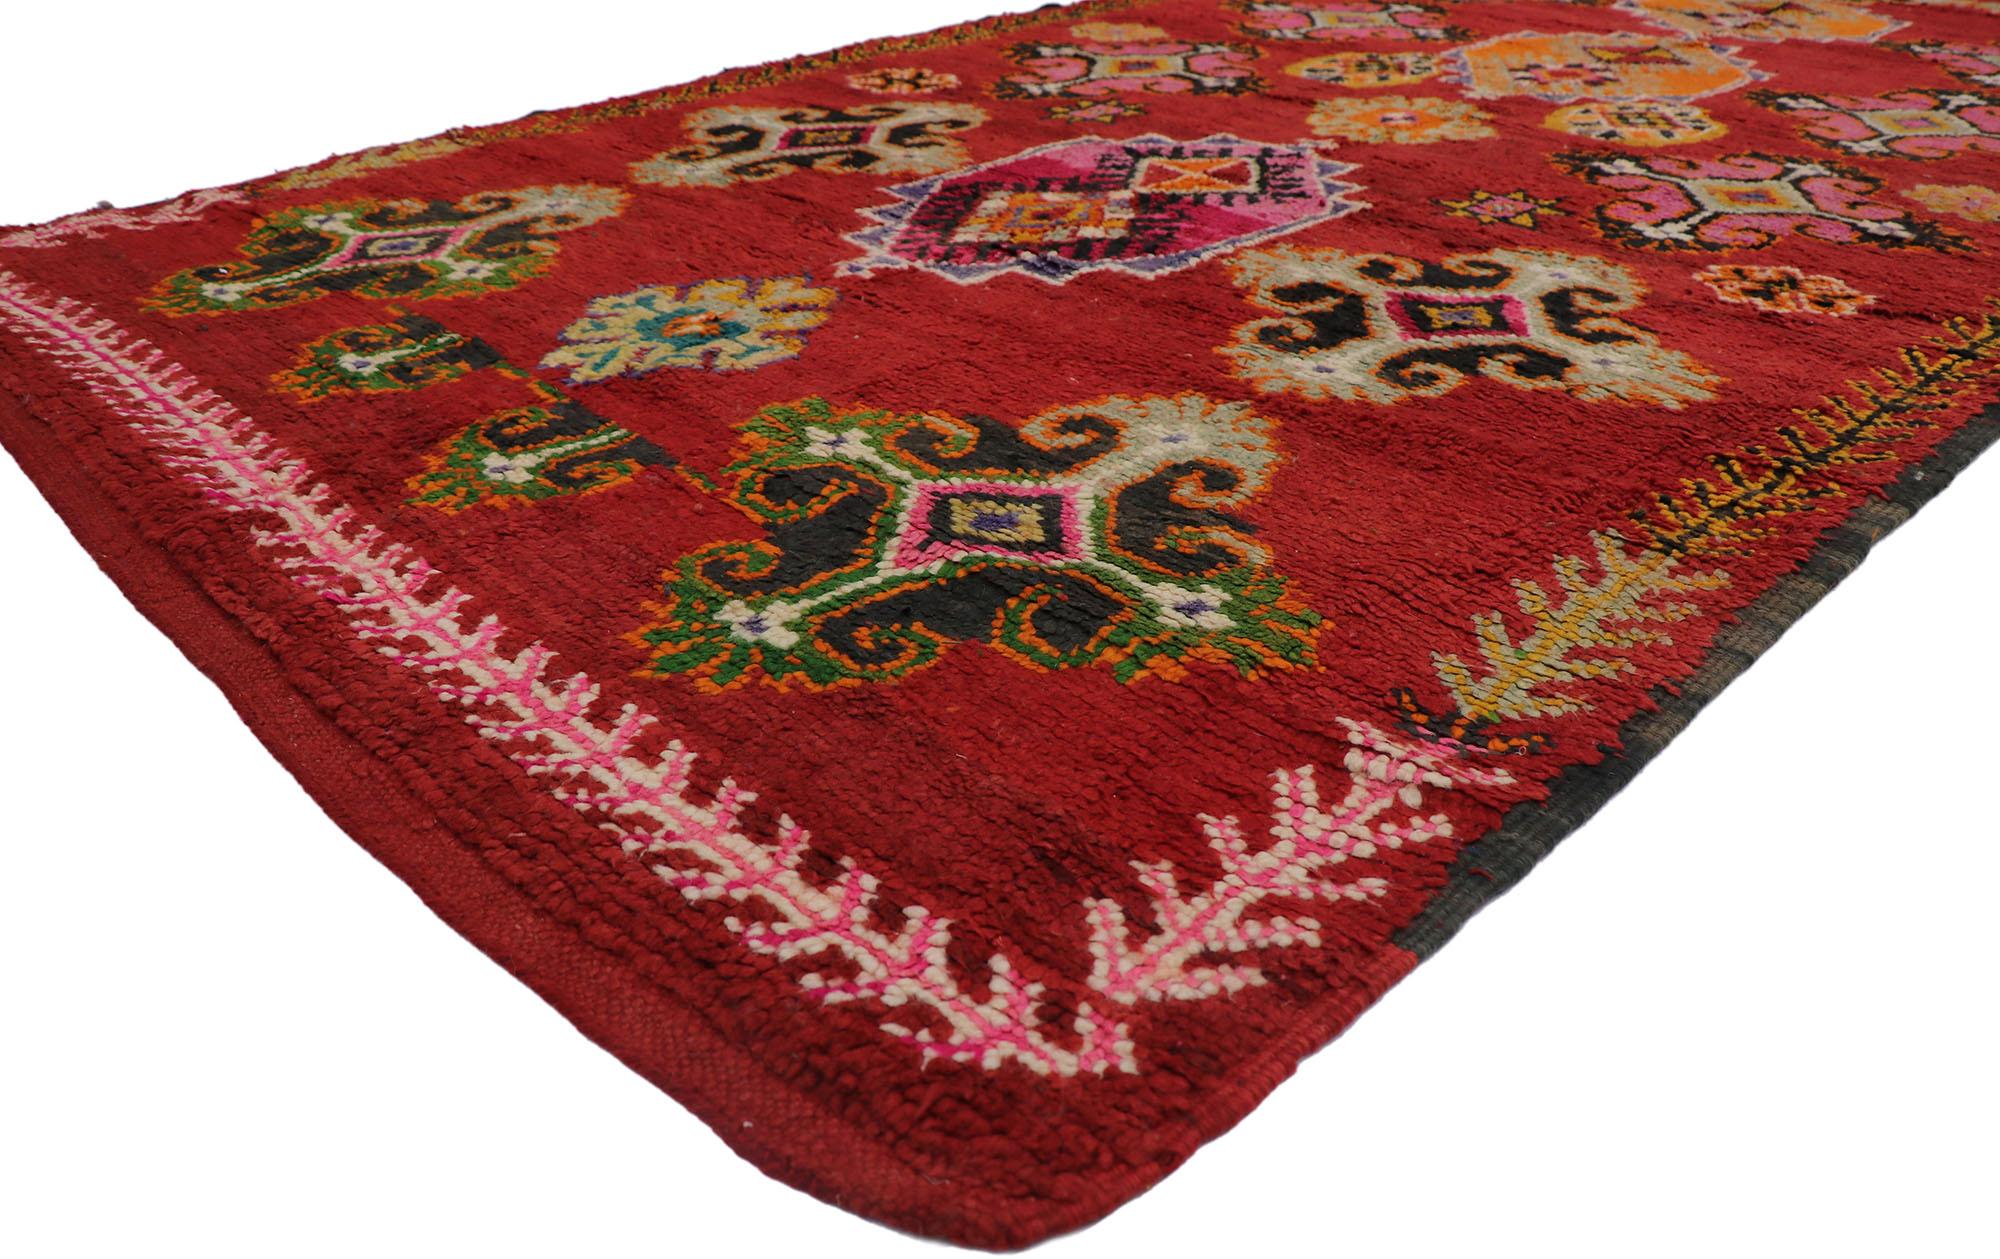 21530 vintage Berber Moroccan rug with Tribal style 06'07 x 12'06. Showcasing an expressive tribal design in lively colors, incredible detail and texture, this hand knotted wool vintage Berber Moroccan rug is a captivating vision of woven beauty.